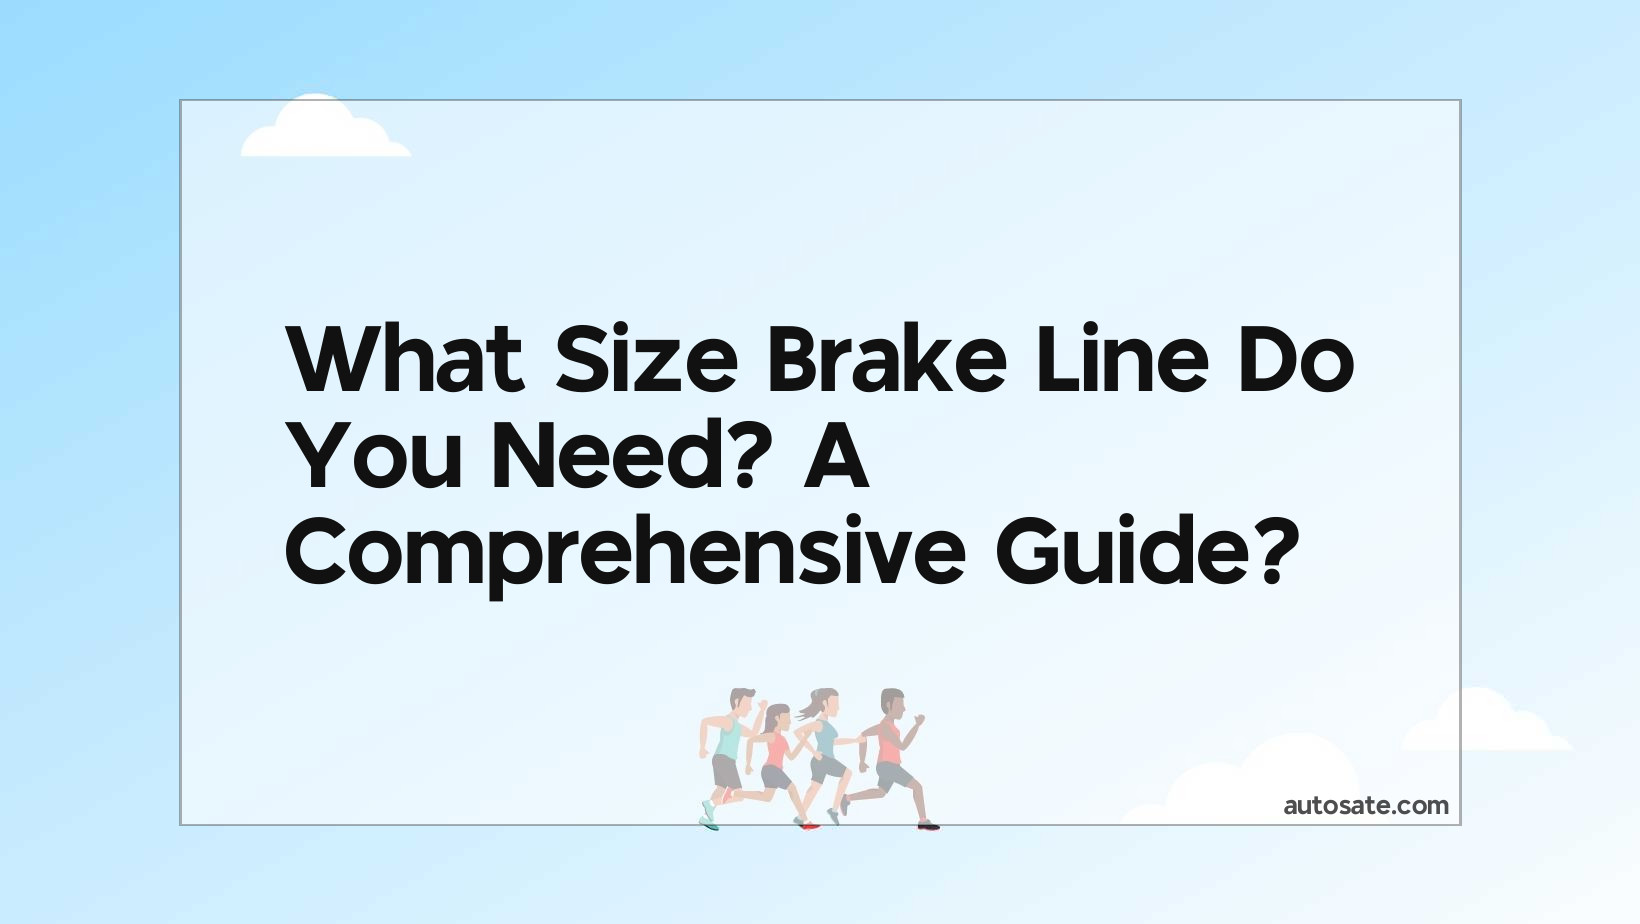 What Size Brake Line Do You Need? A Comprehensive Guide